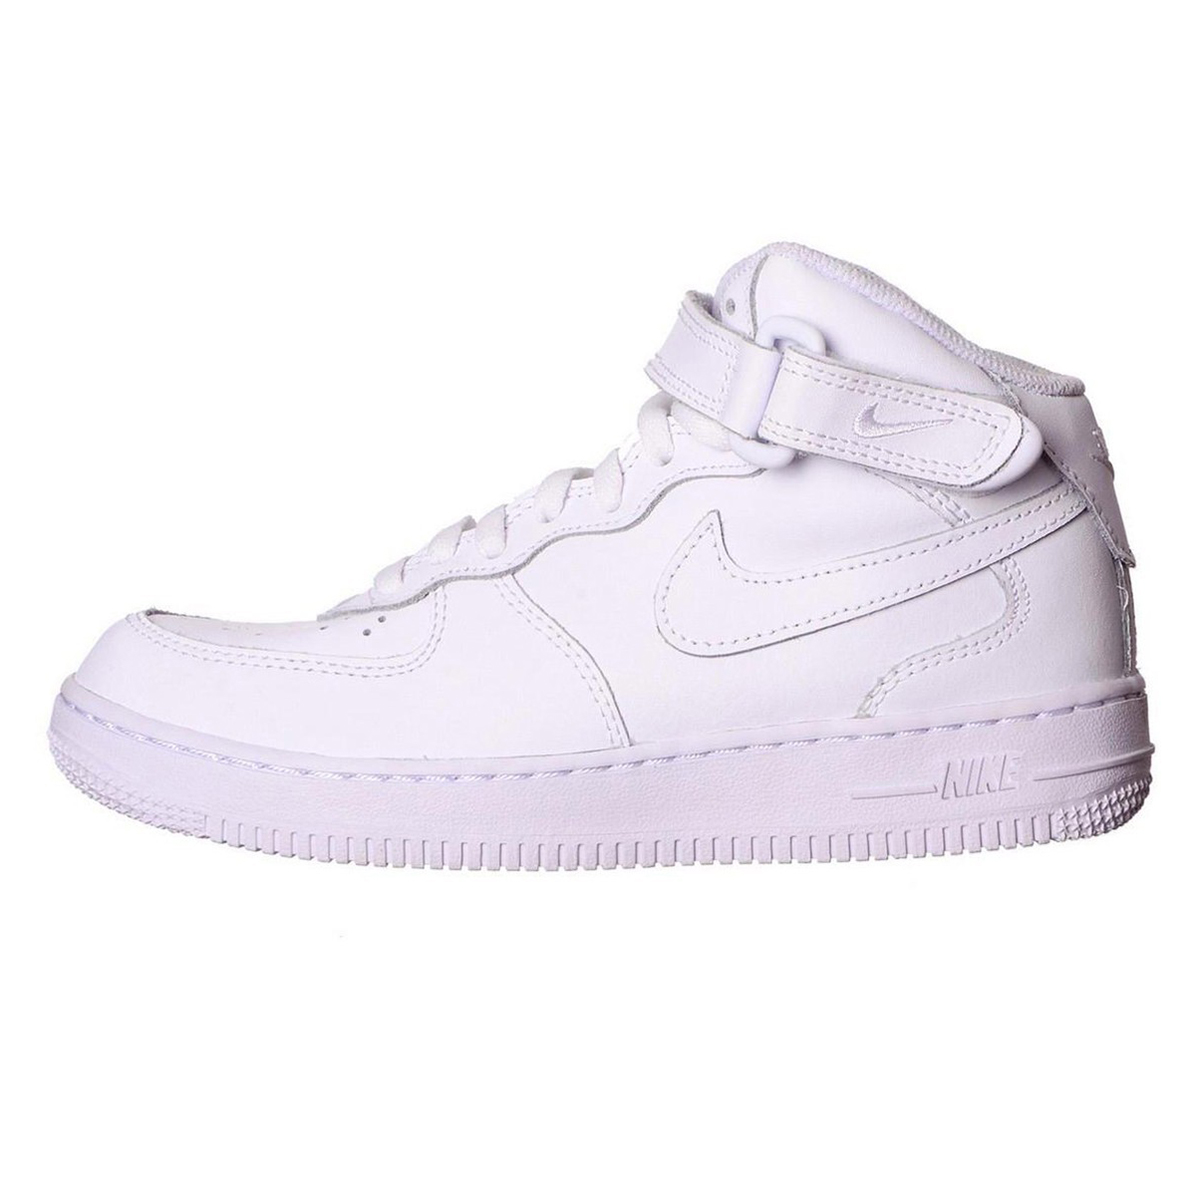 Nike FORCE 1 MID (PS) 